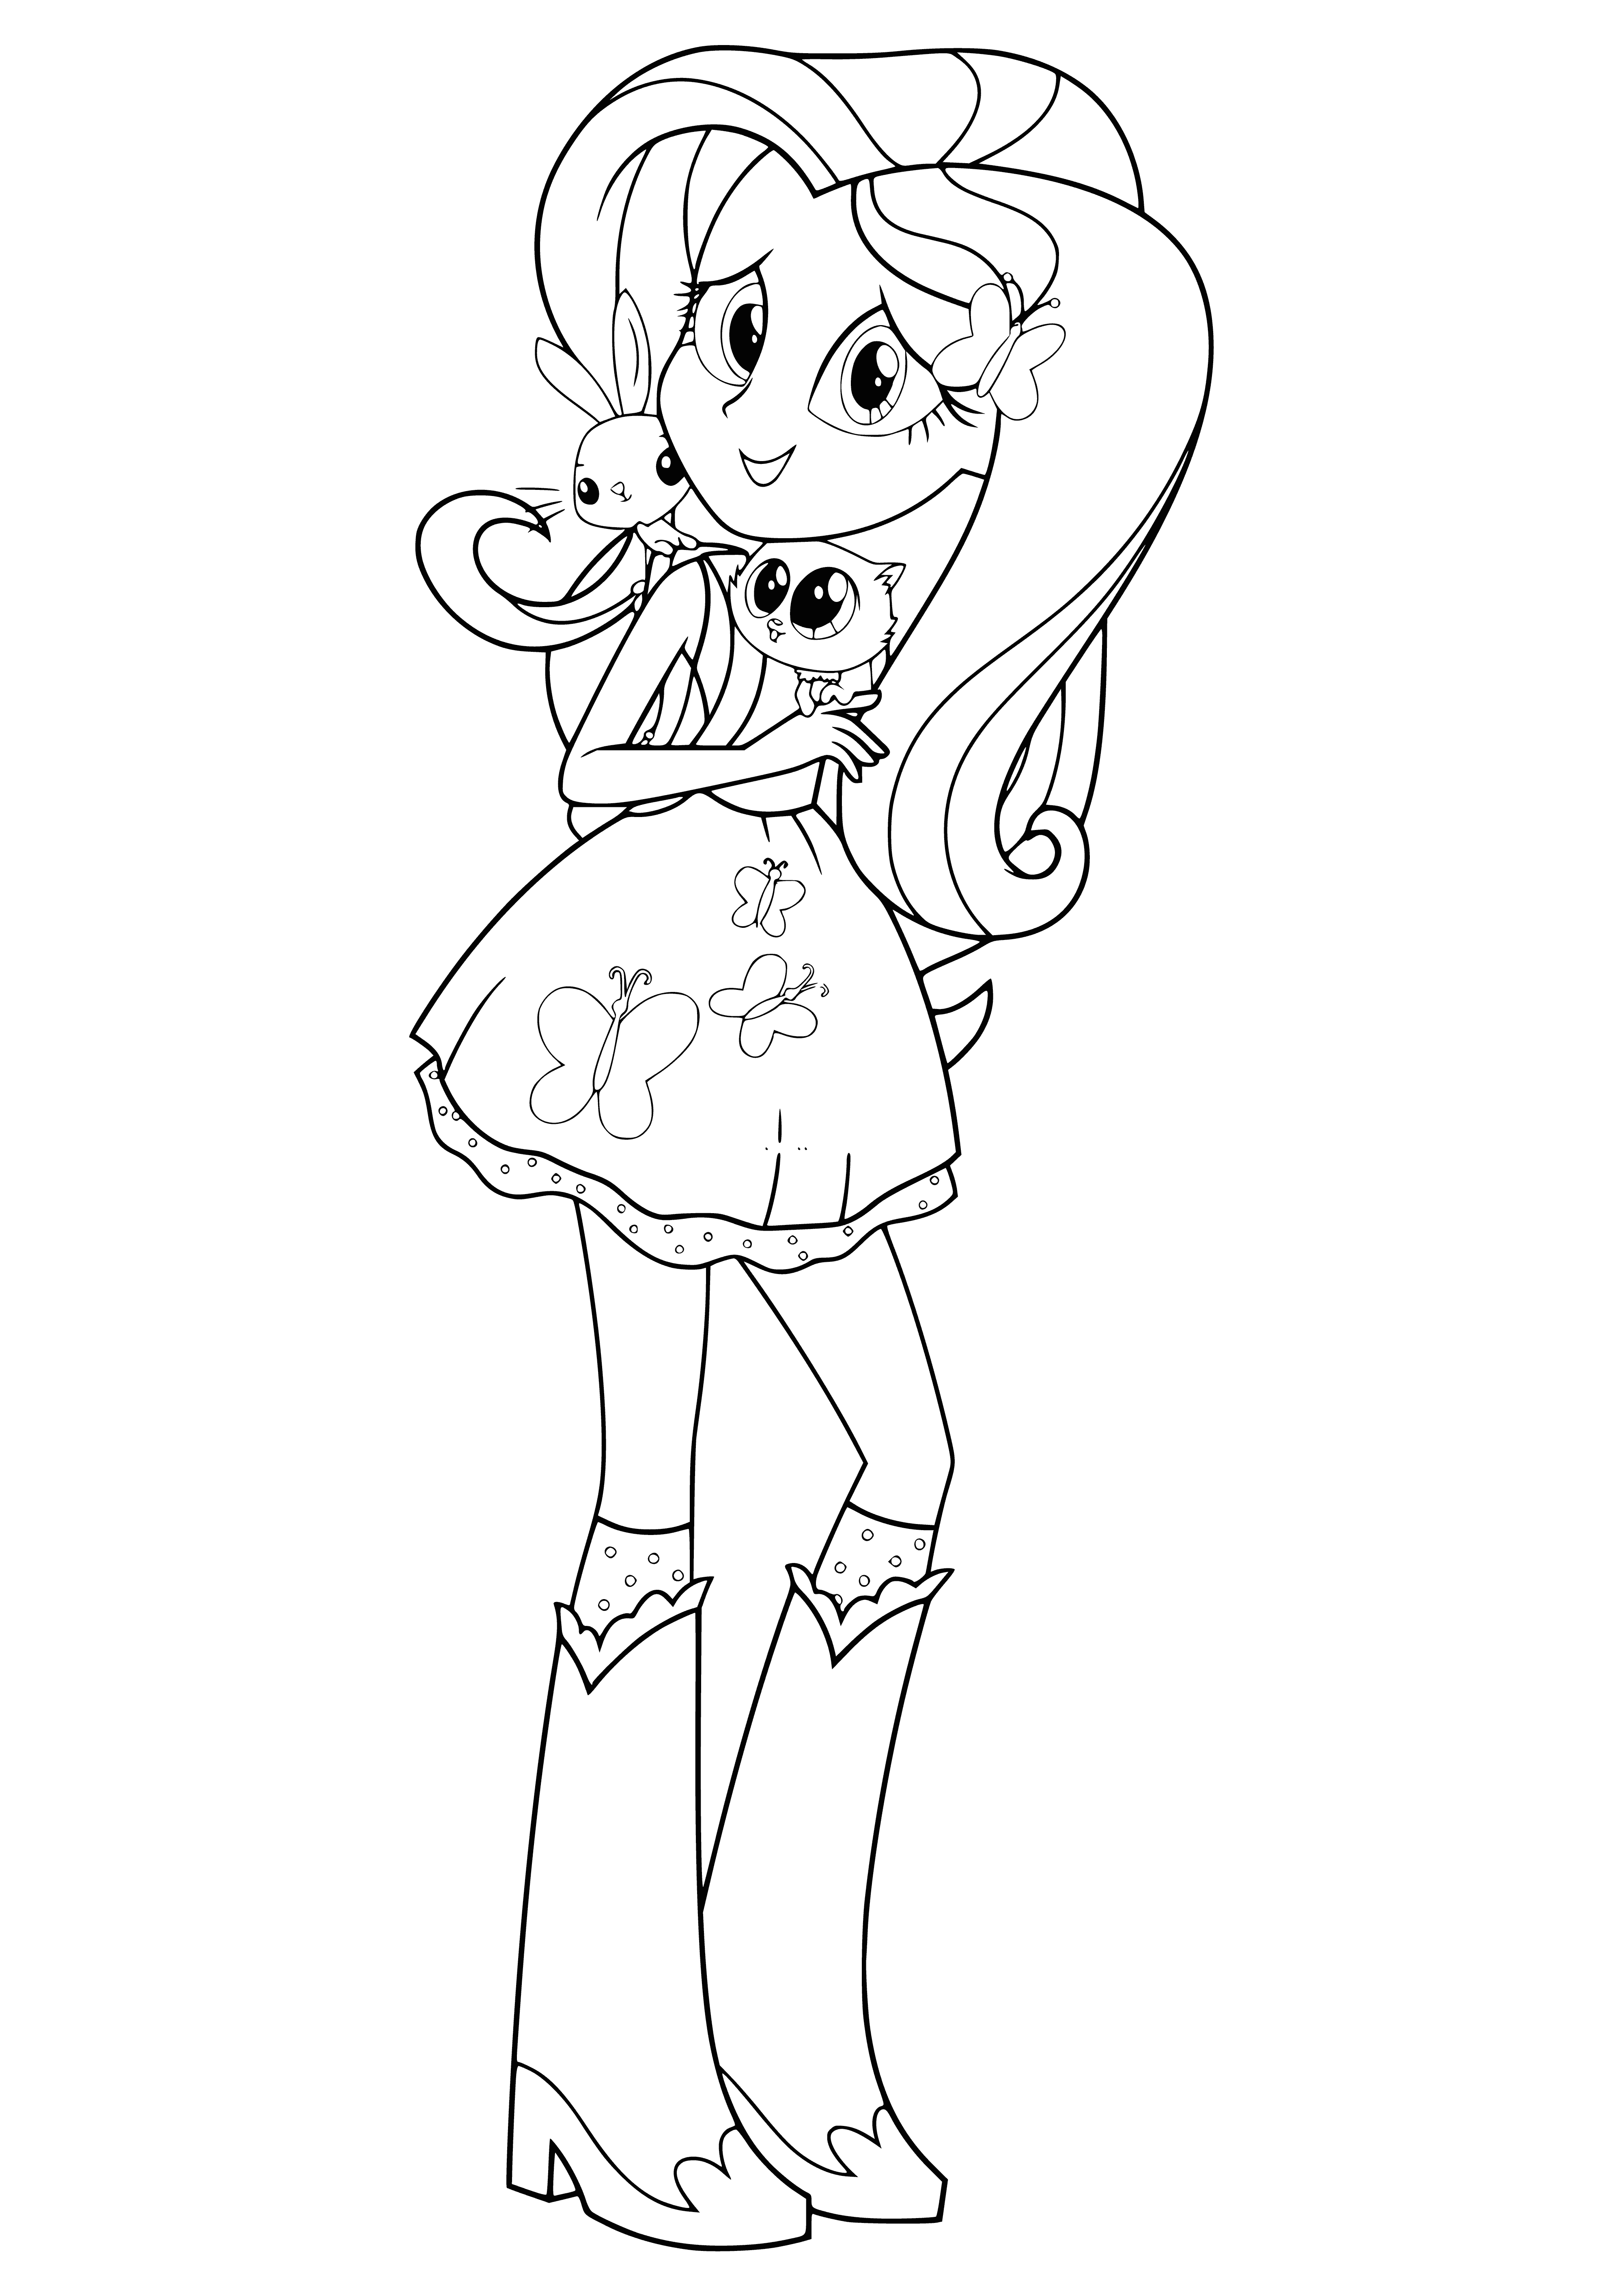 coloring page: Four ponies in a field of flowers, wearing dresses, & surrounded by butterflies - the Equestria Girls - Flattershay coloring page! #coloringfun